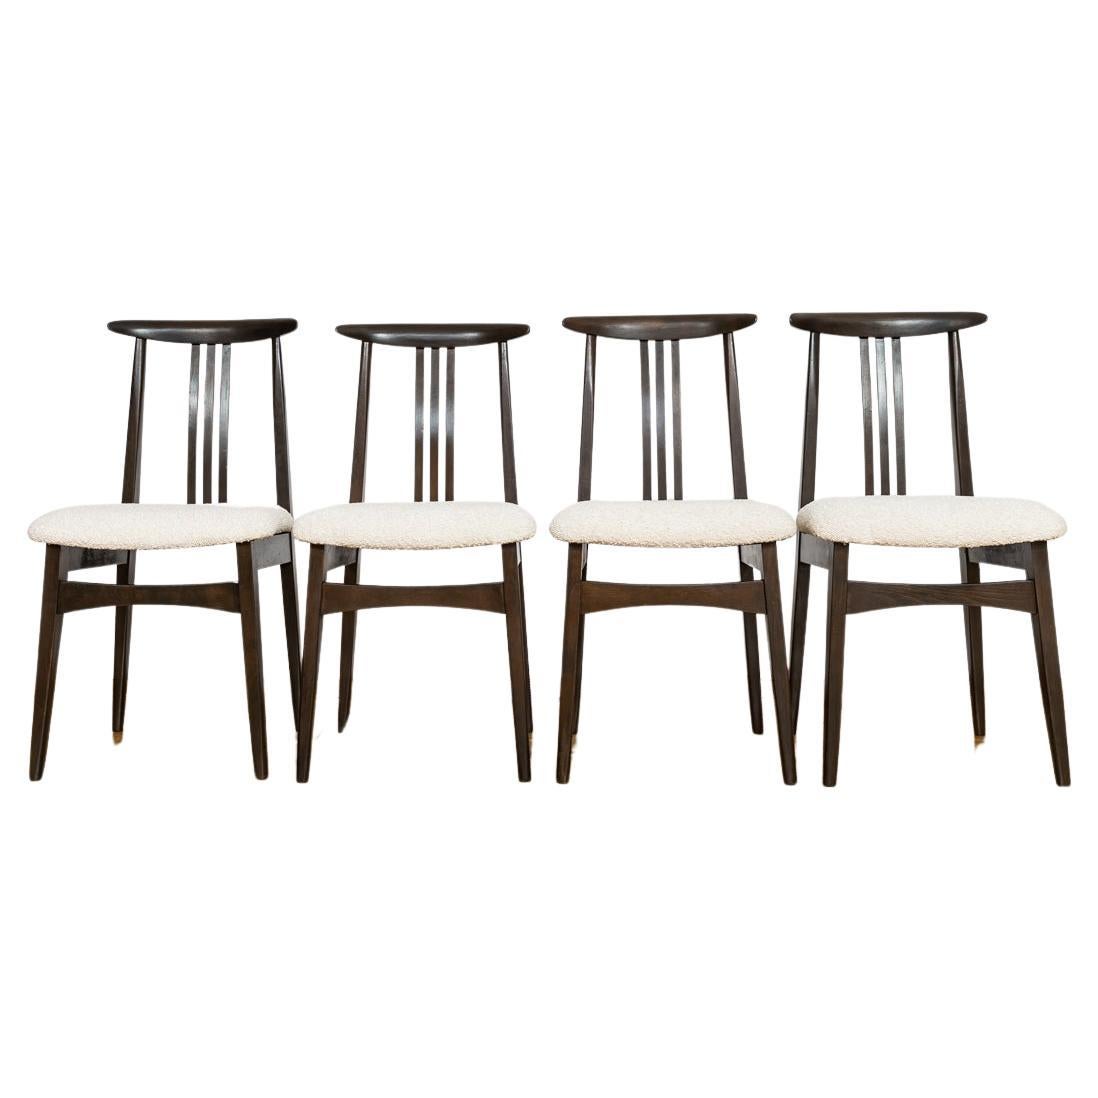 Set of 4, Dining Chairs by M. Zieliński, 1960s For Sale